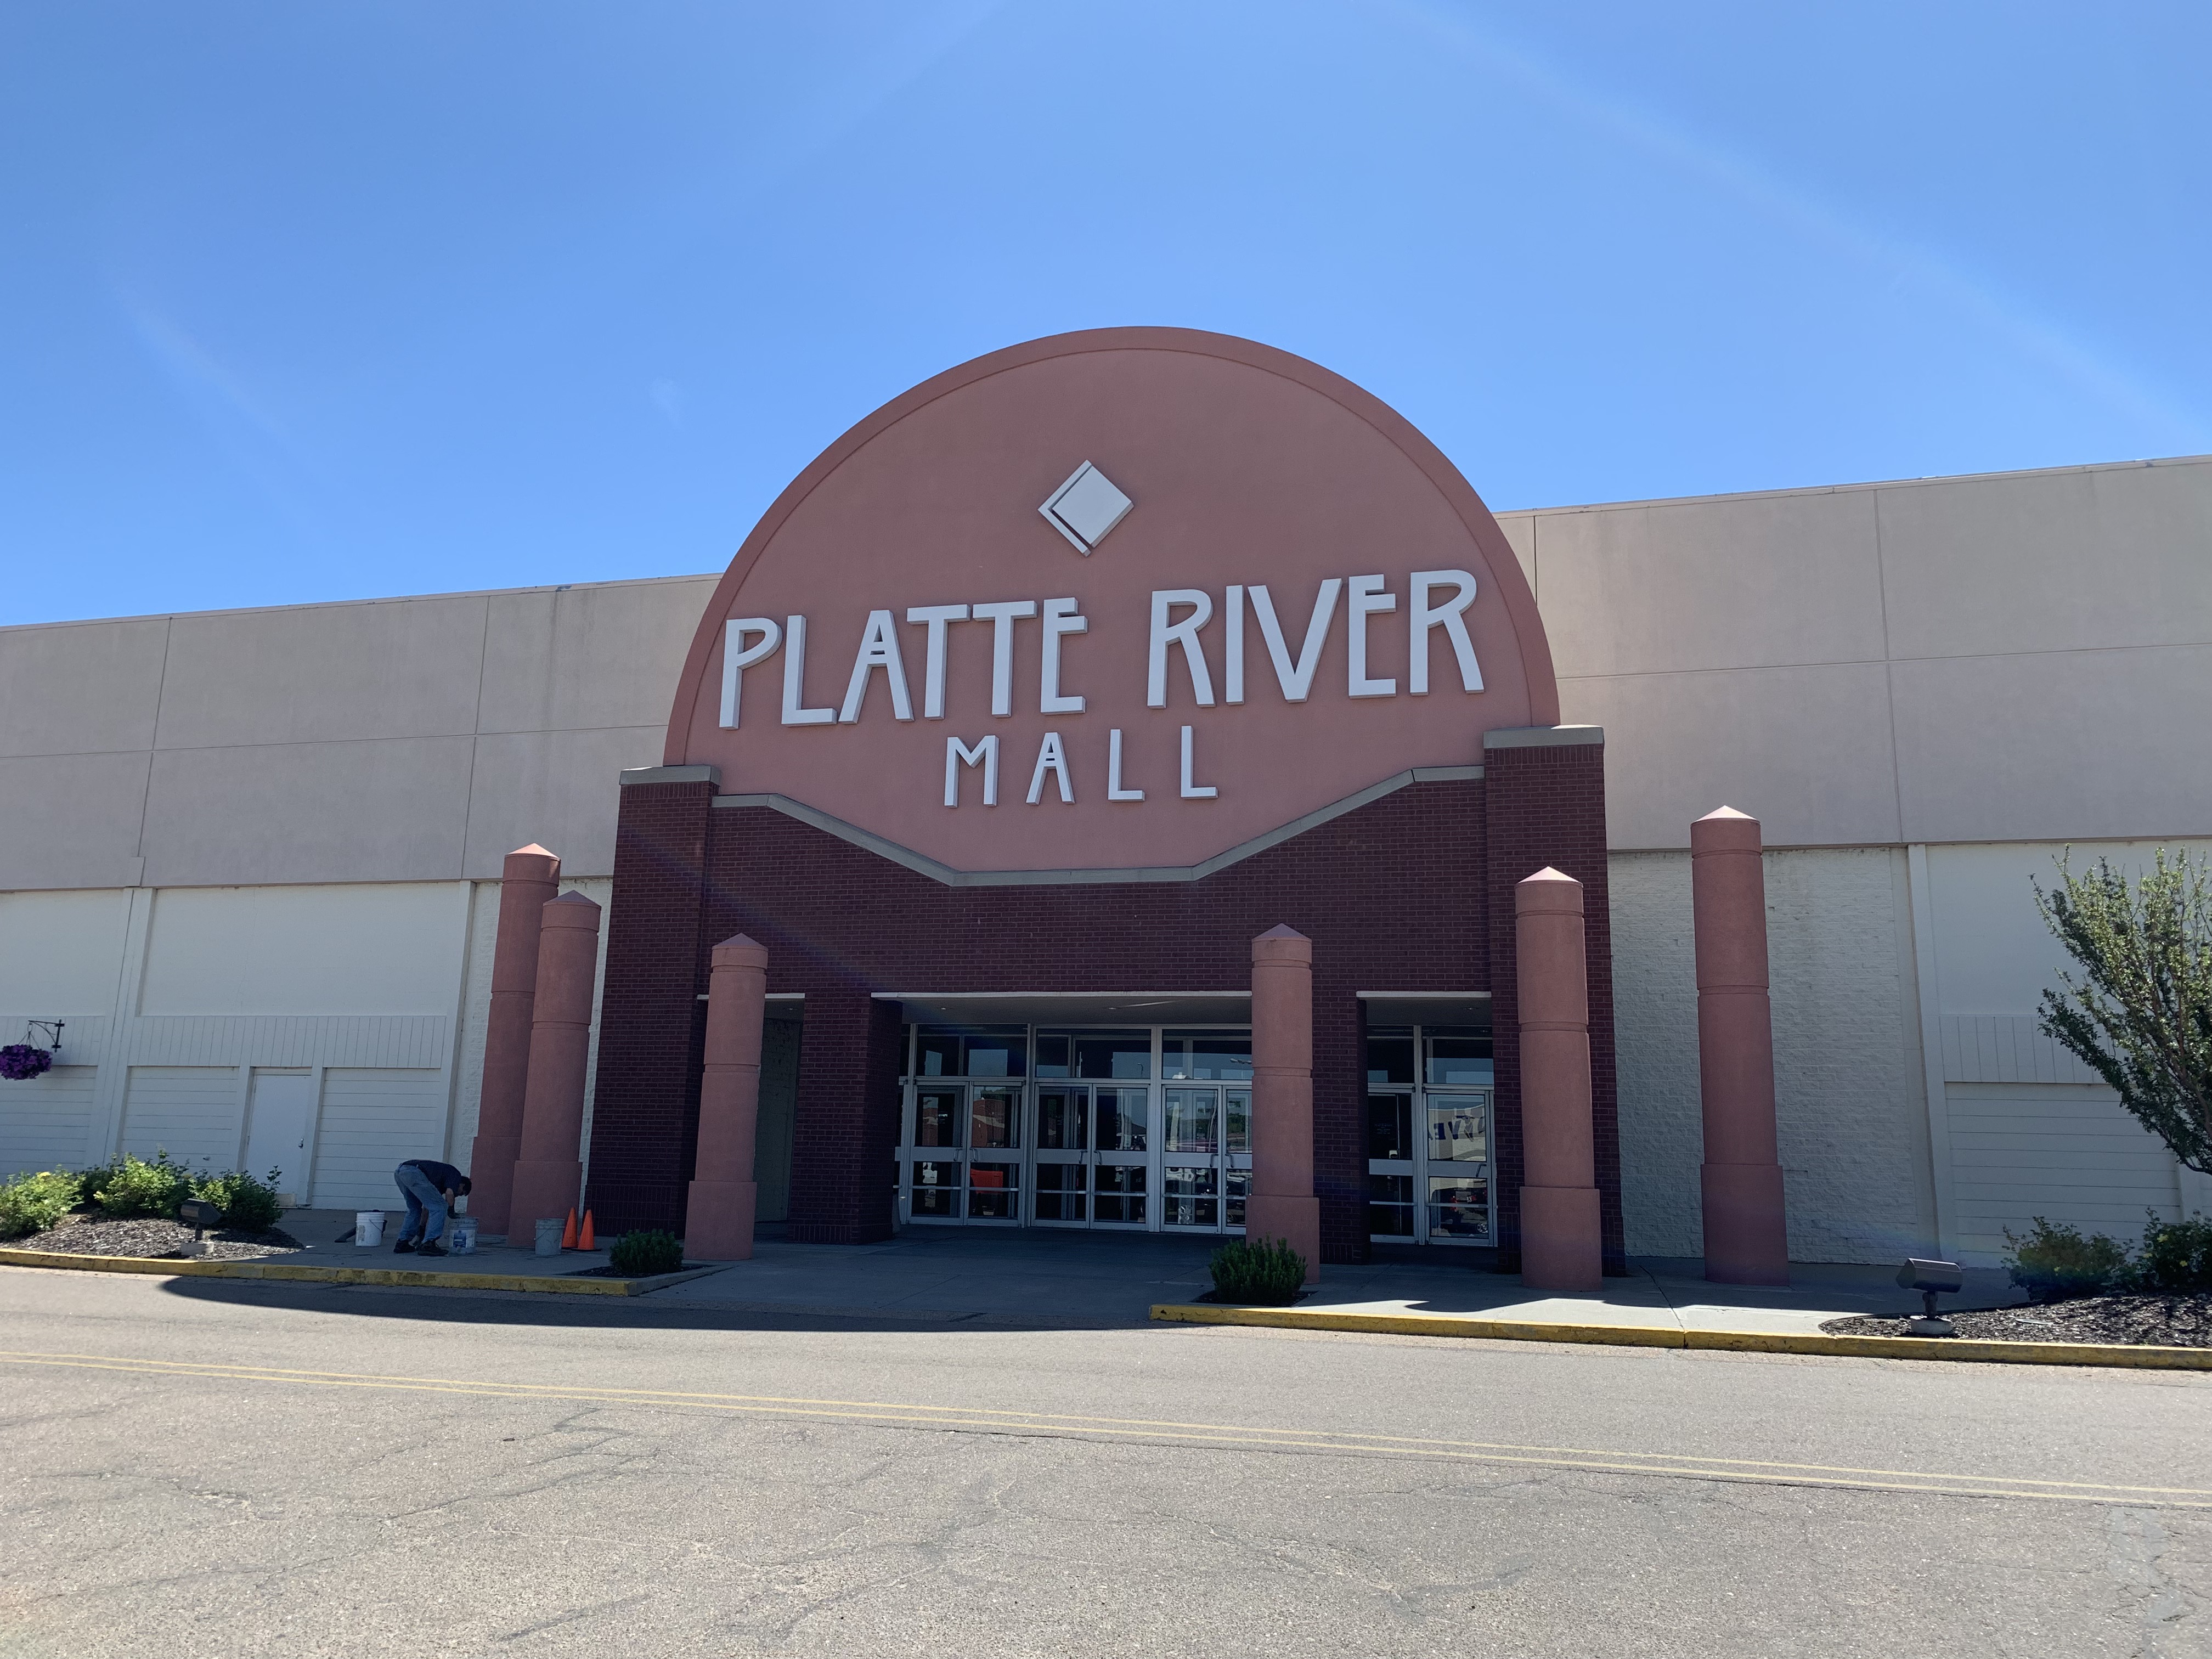 Developer shares big plans for Platte River Mall's second act